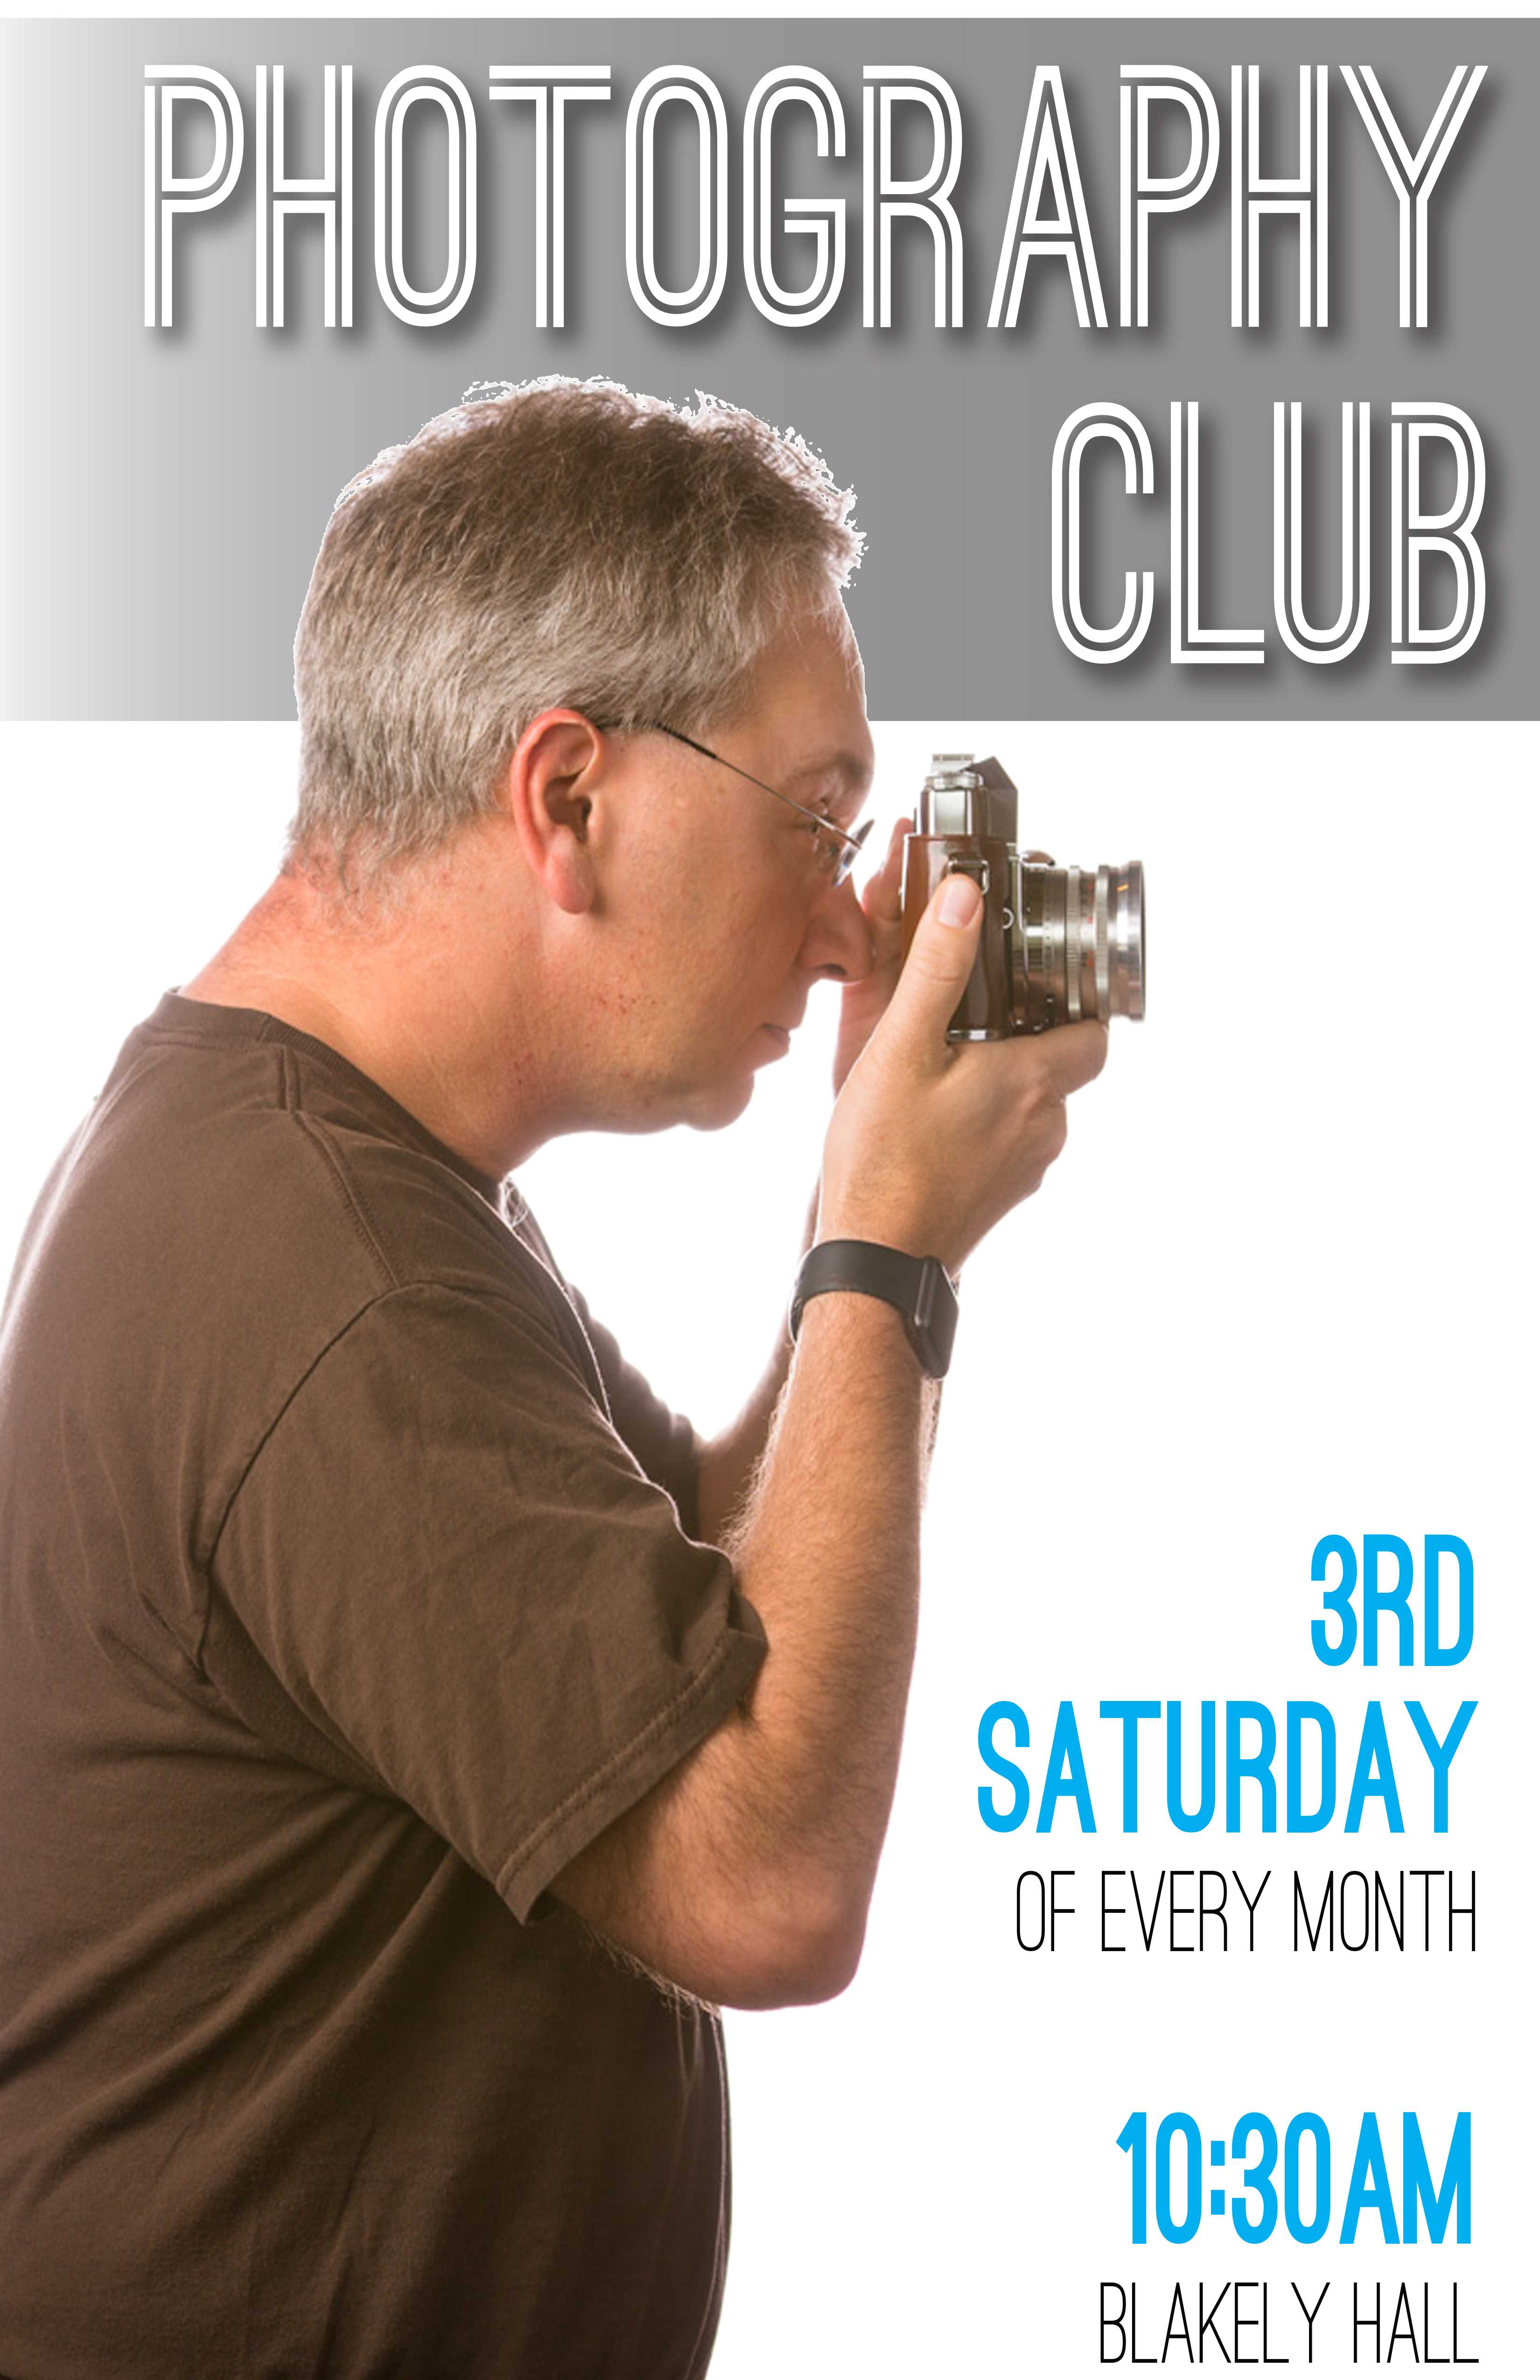 Issaquah Highlands Photography Club